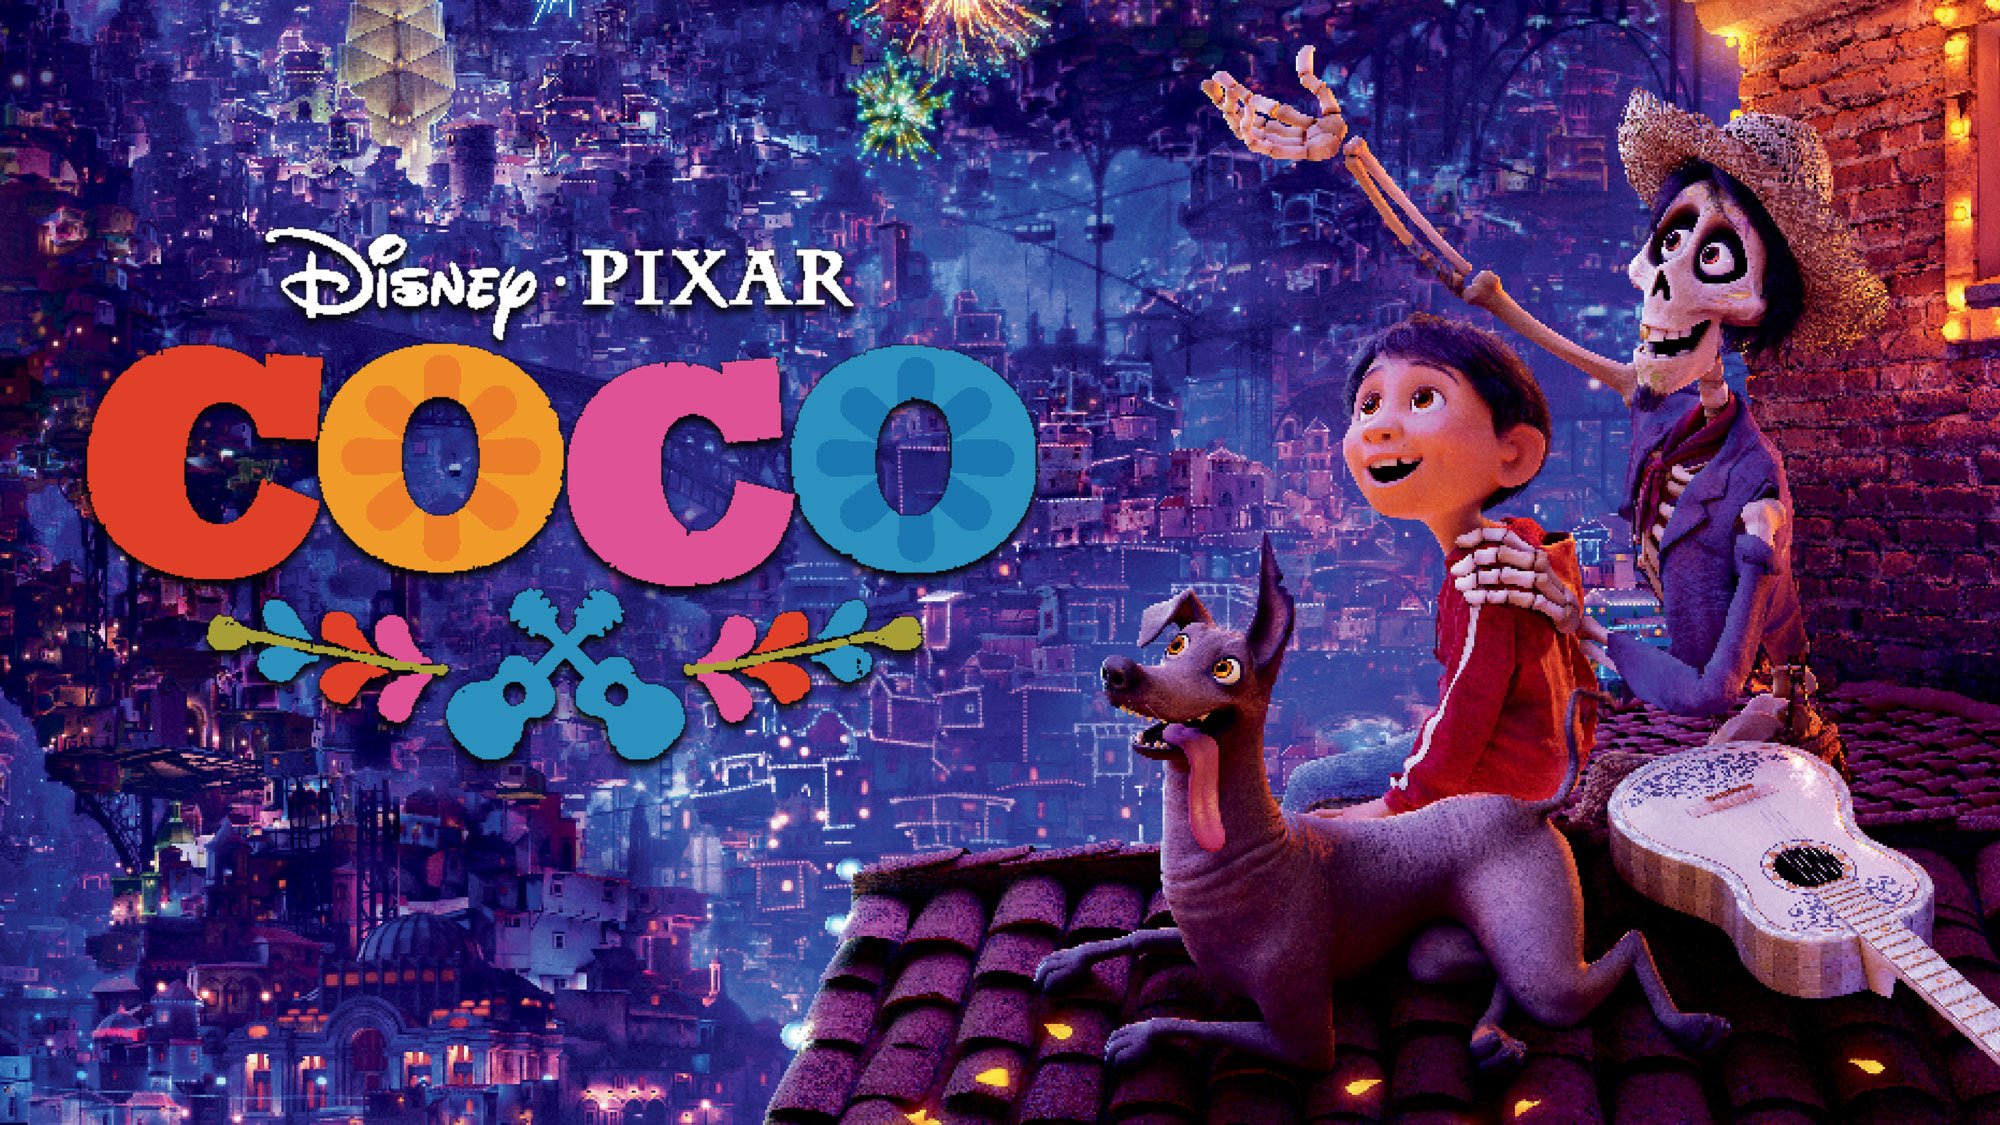 Coco Watch Full Movie Online, Streaming with Subtitles | Flixjini